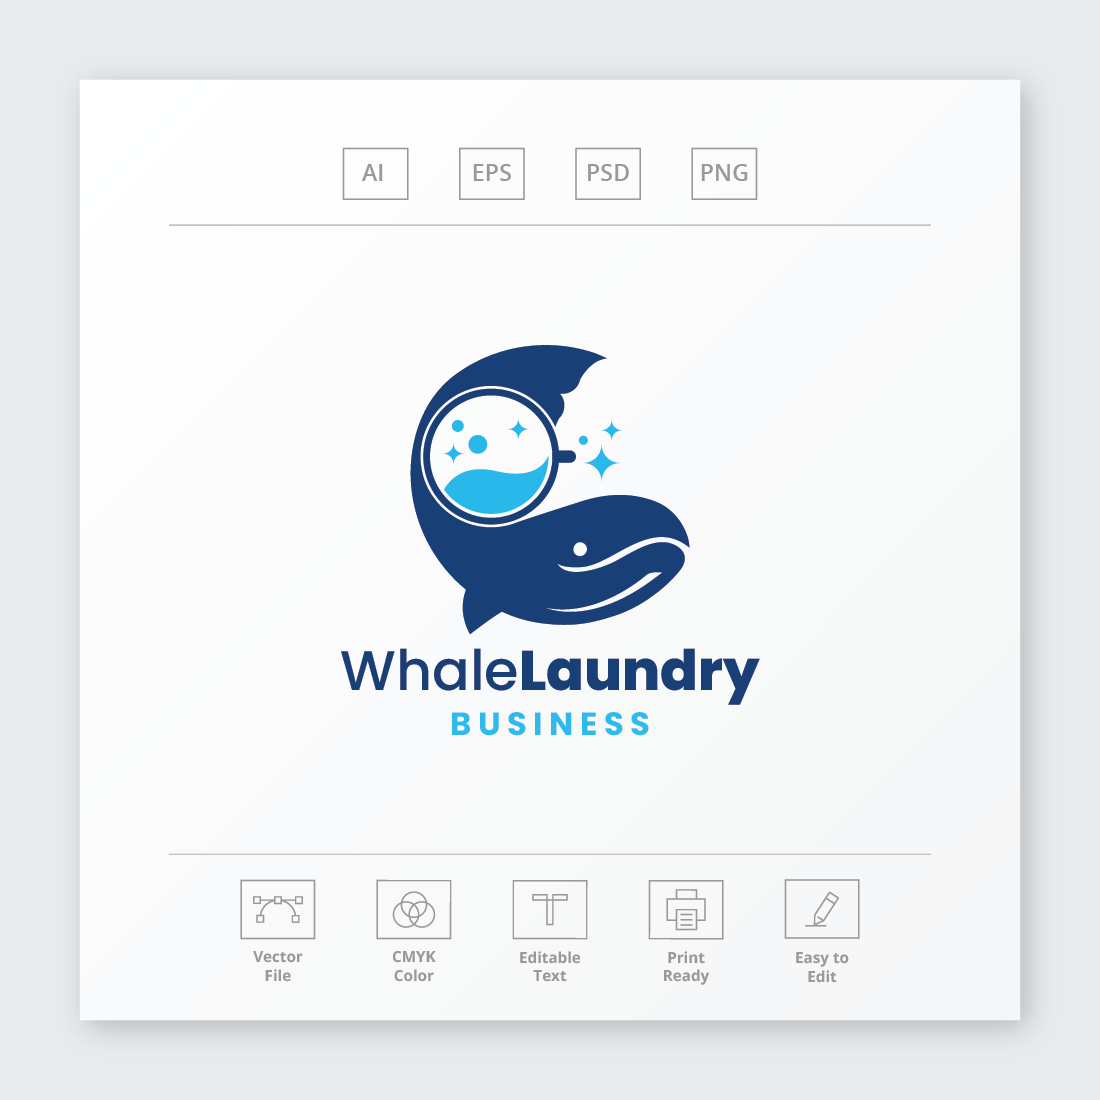 Whale Laundry Logo cover image.